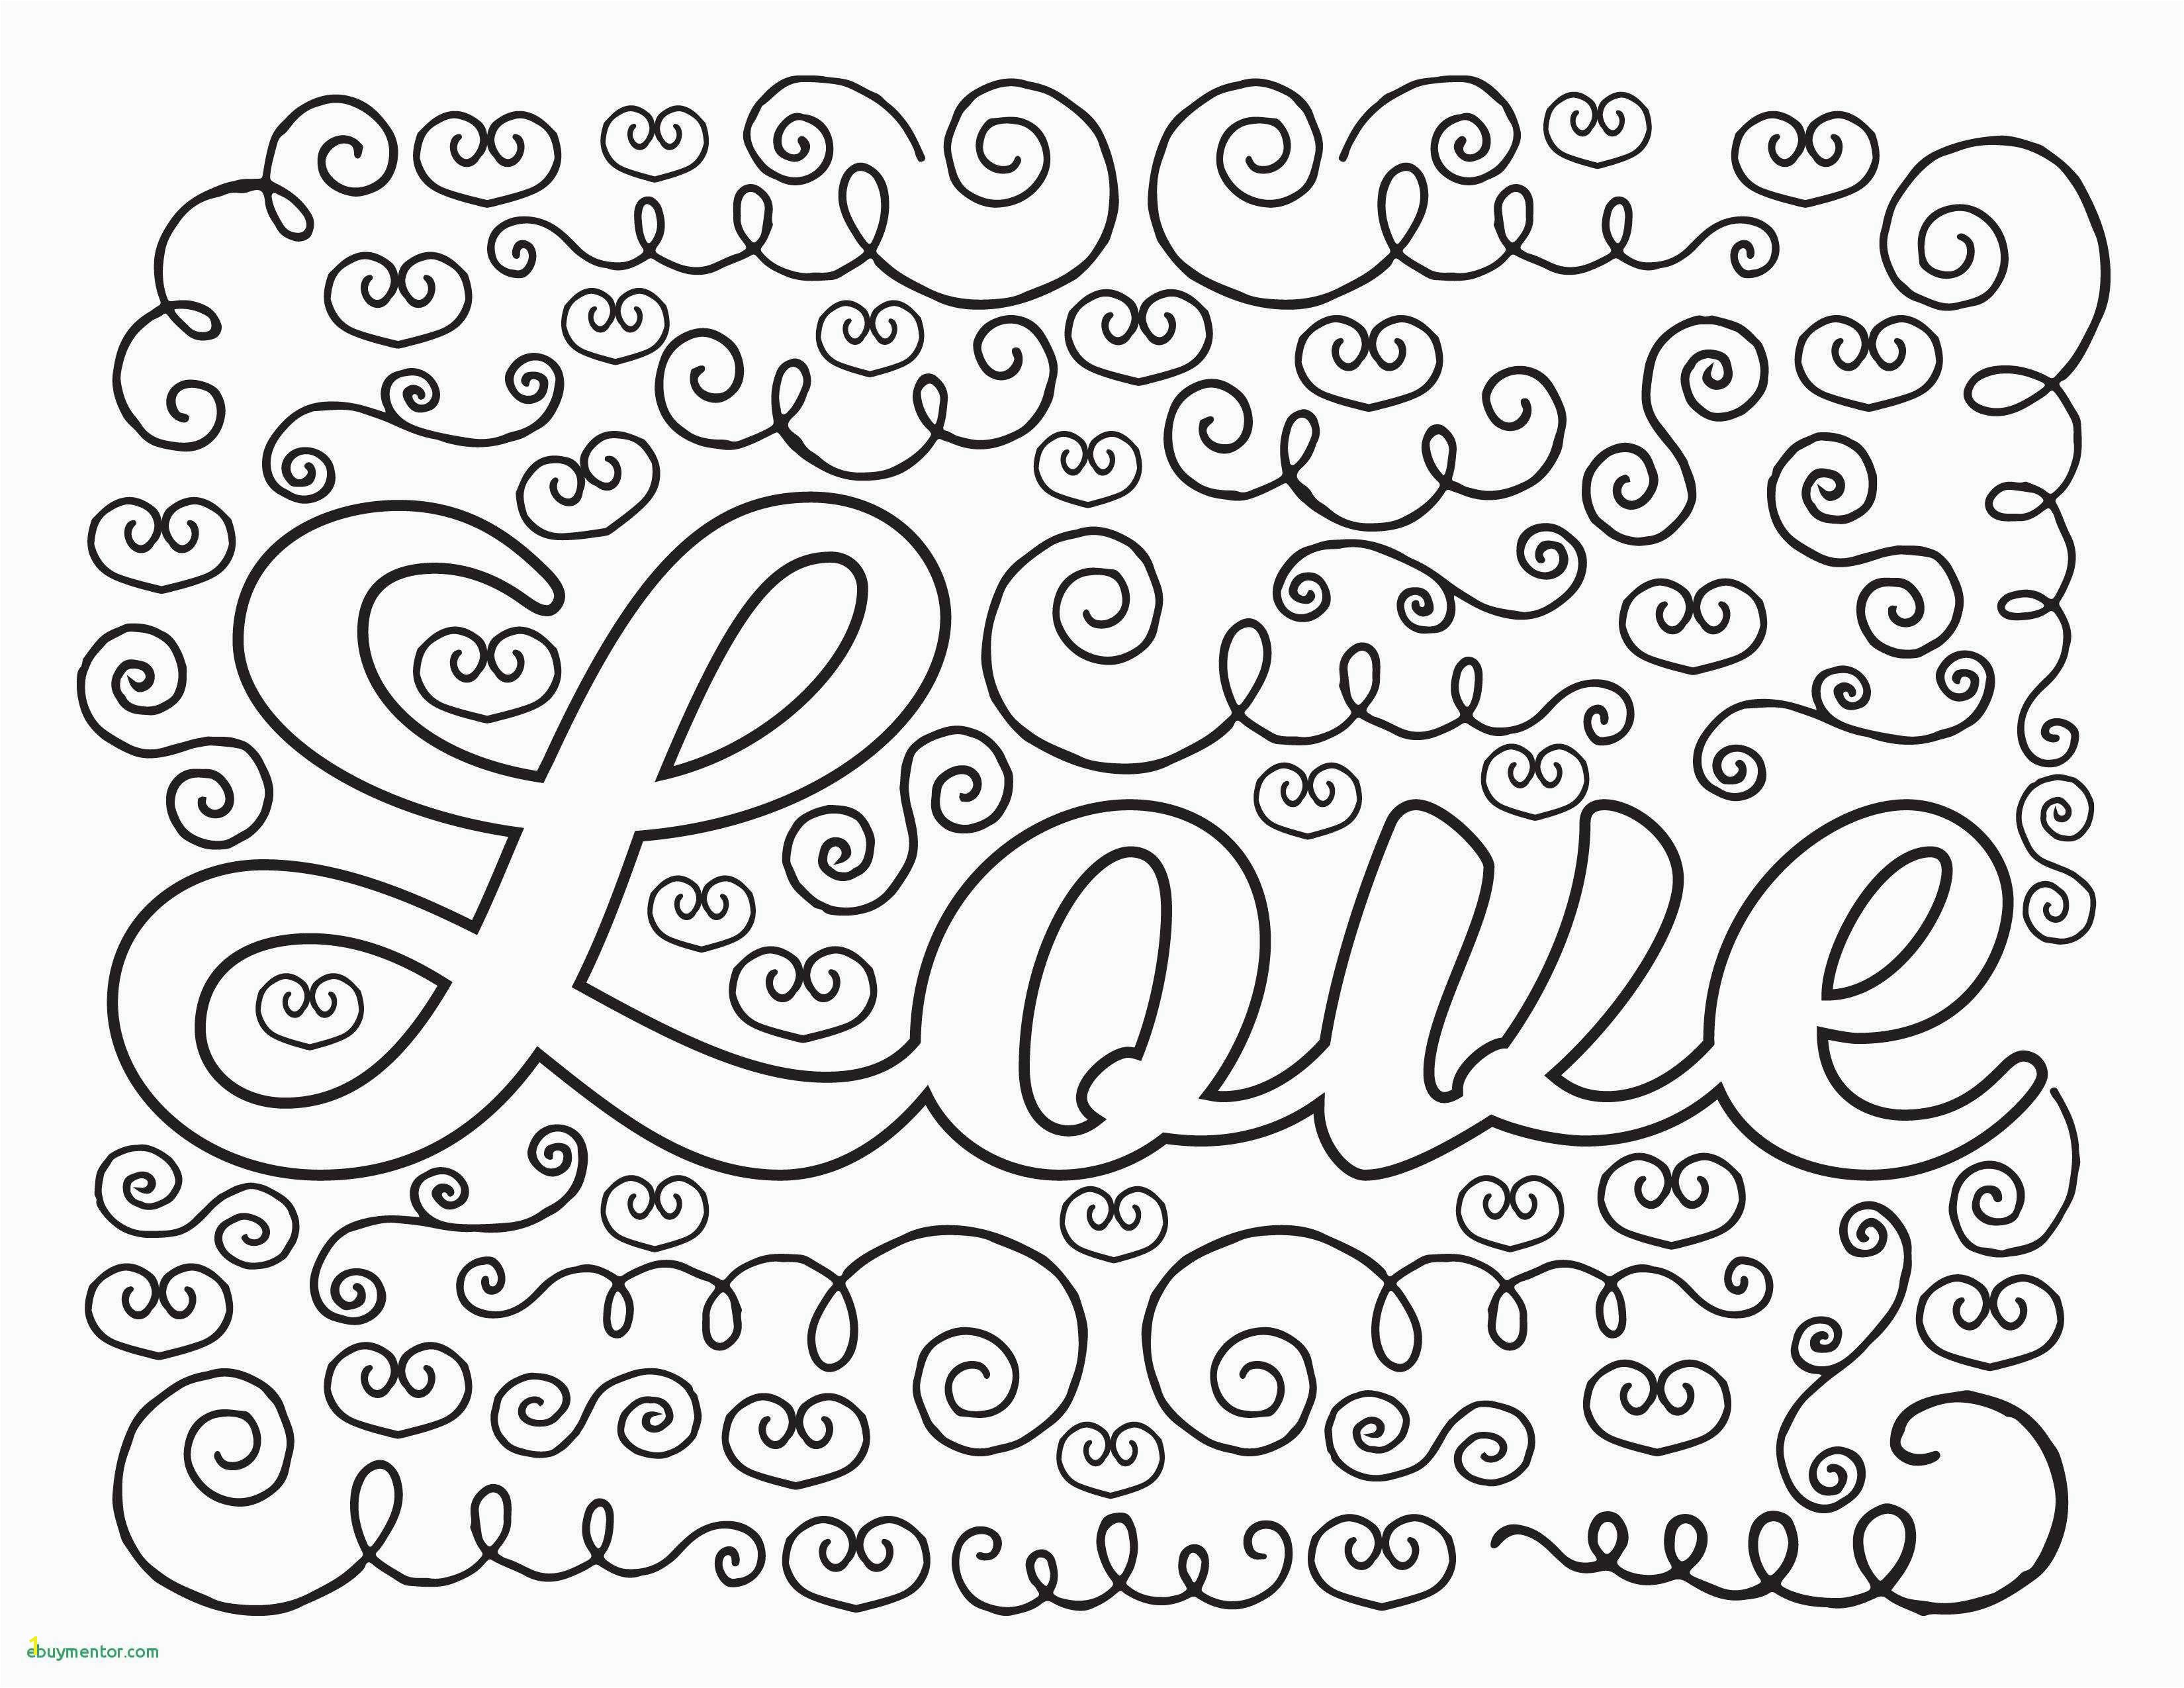 Happy New Year 2018 Coloring Pages Merry Christmas and Happy New Year Coloring Pages Cute Printable